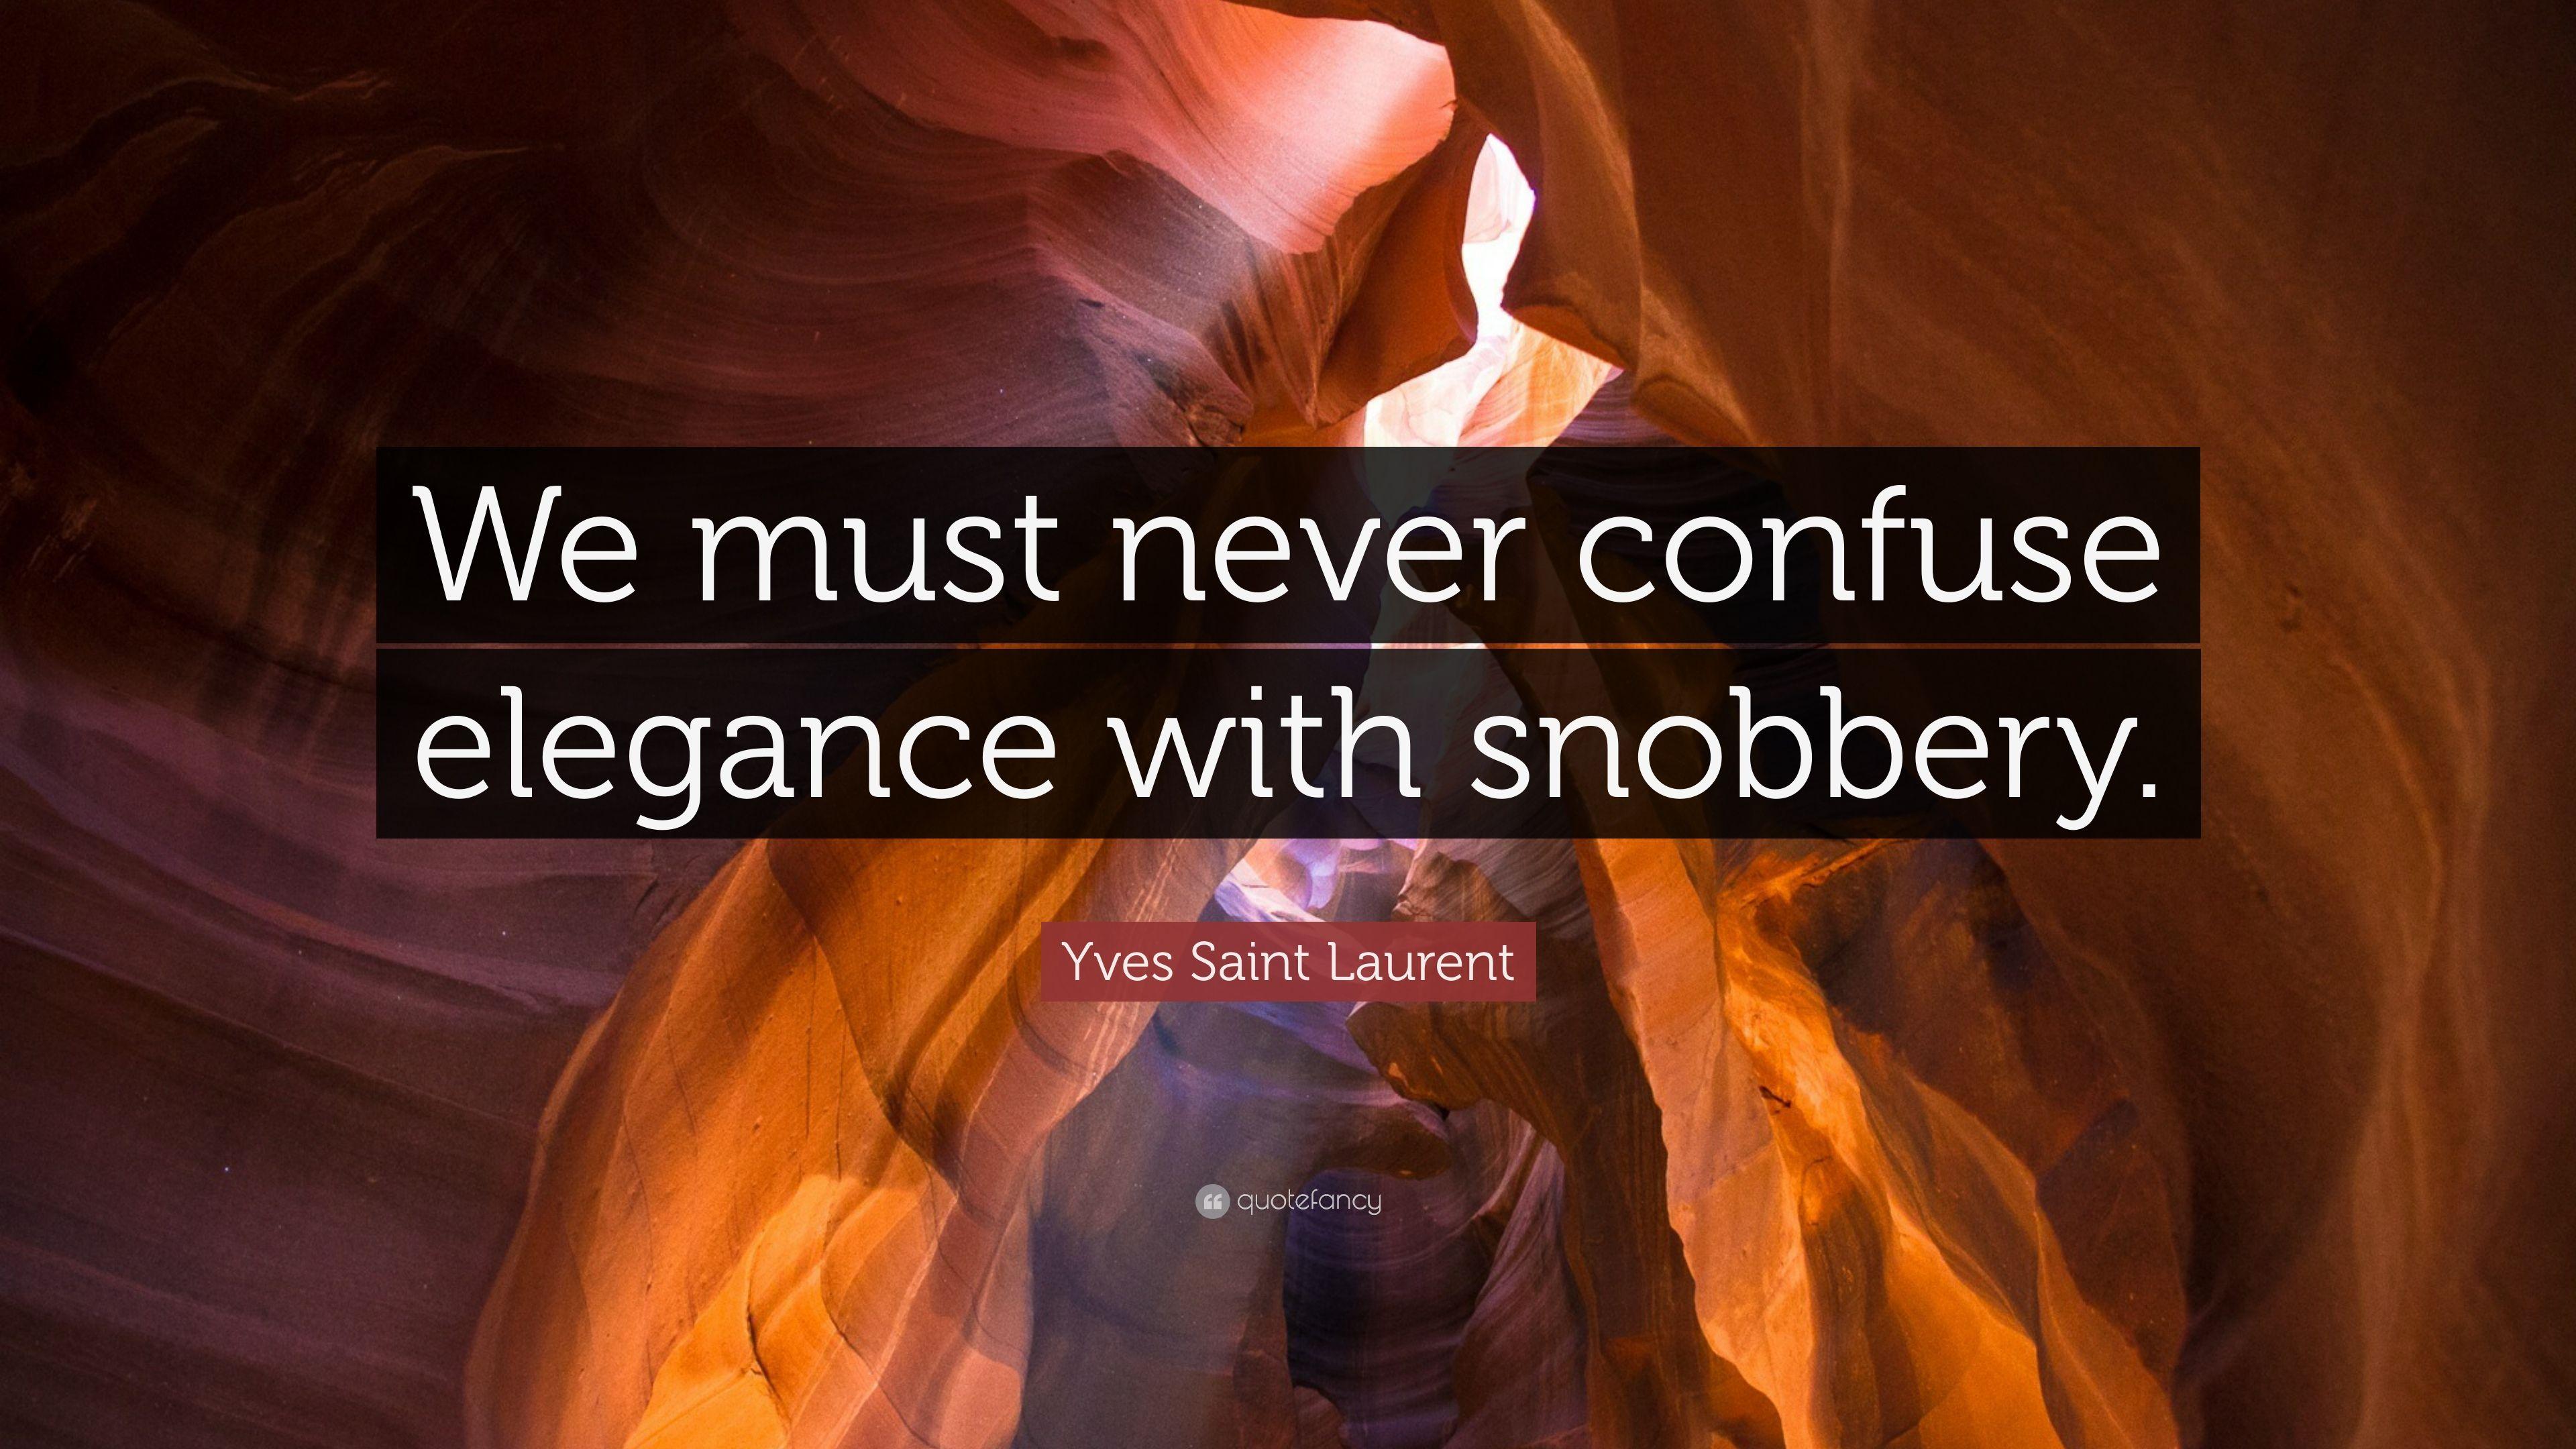 Yves Saint Laurent Quote: “We must never confuse elegance